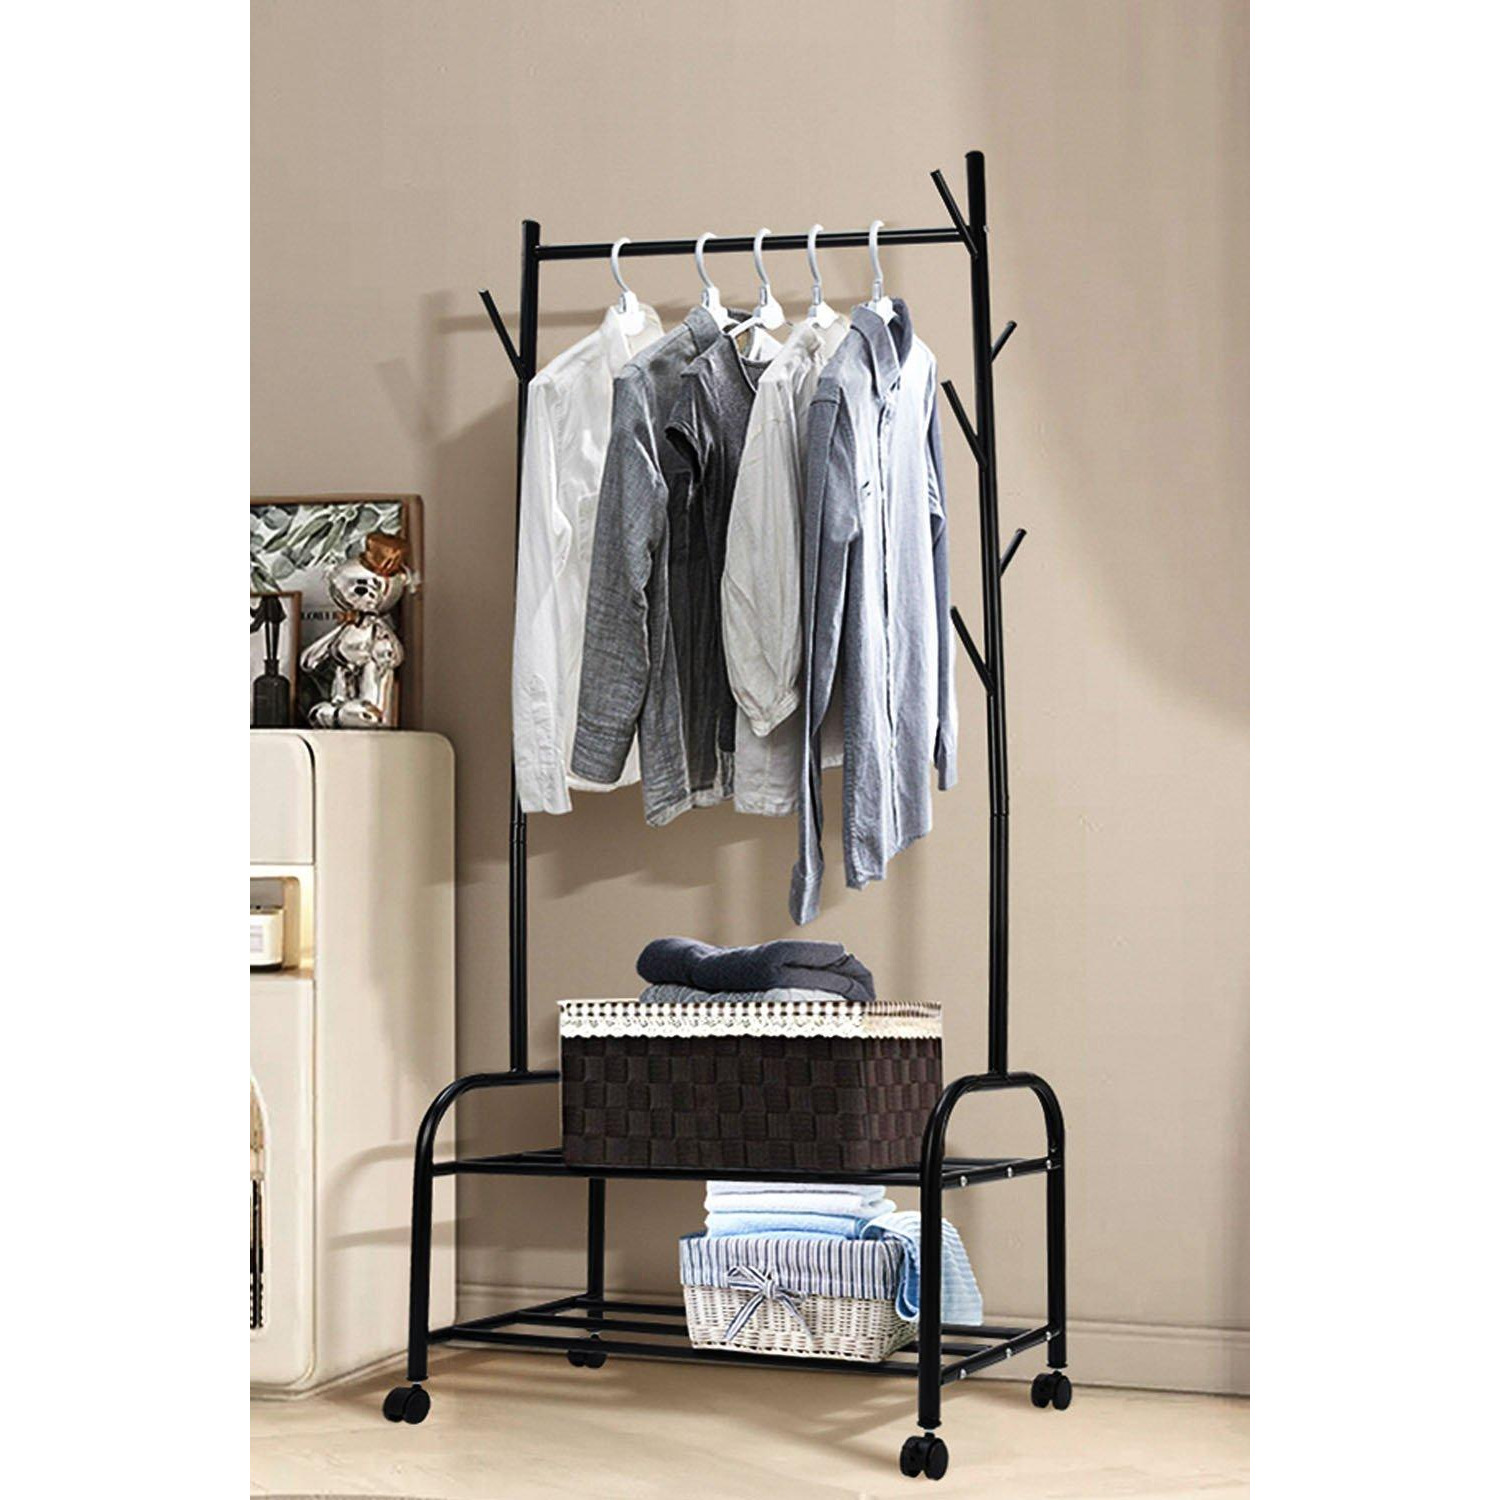 Metal Clothes Rail Rack Garment Hanging Hook Stand with 2 tier Shoes Storage Shelf - image 1